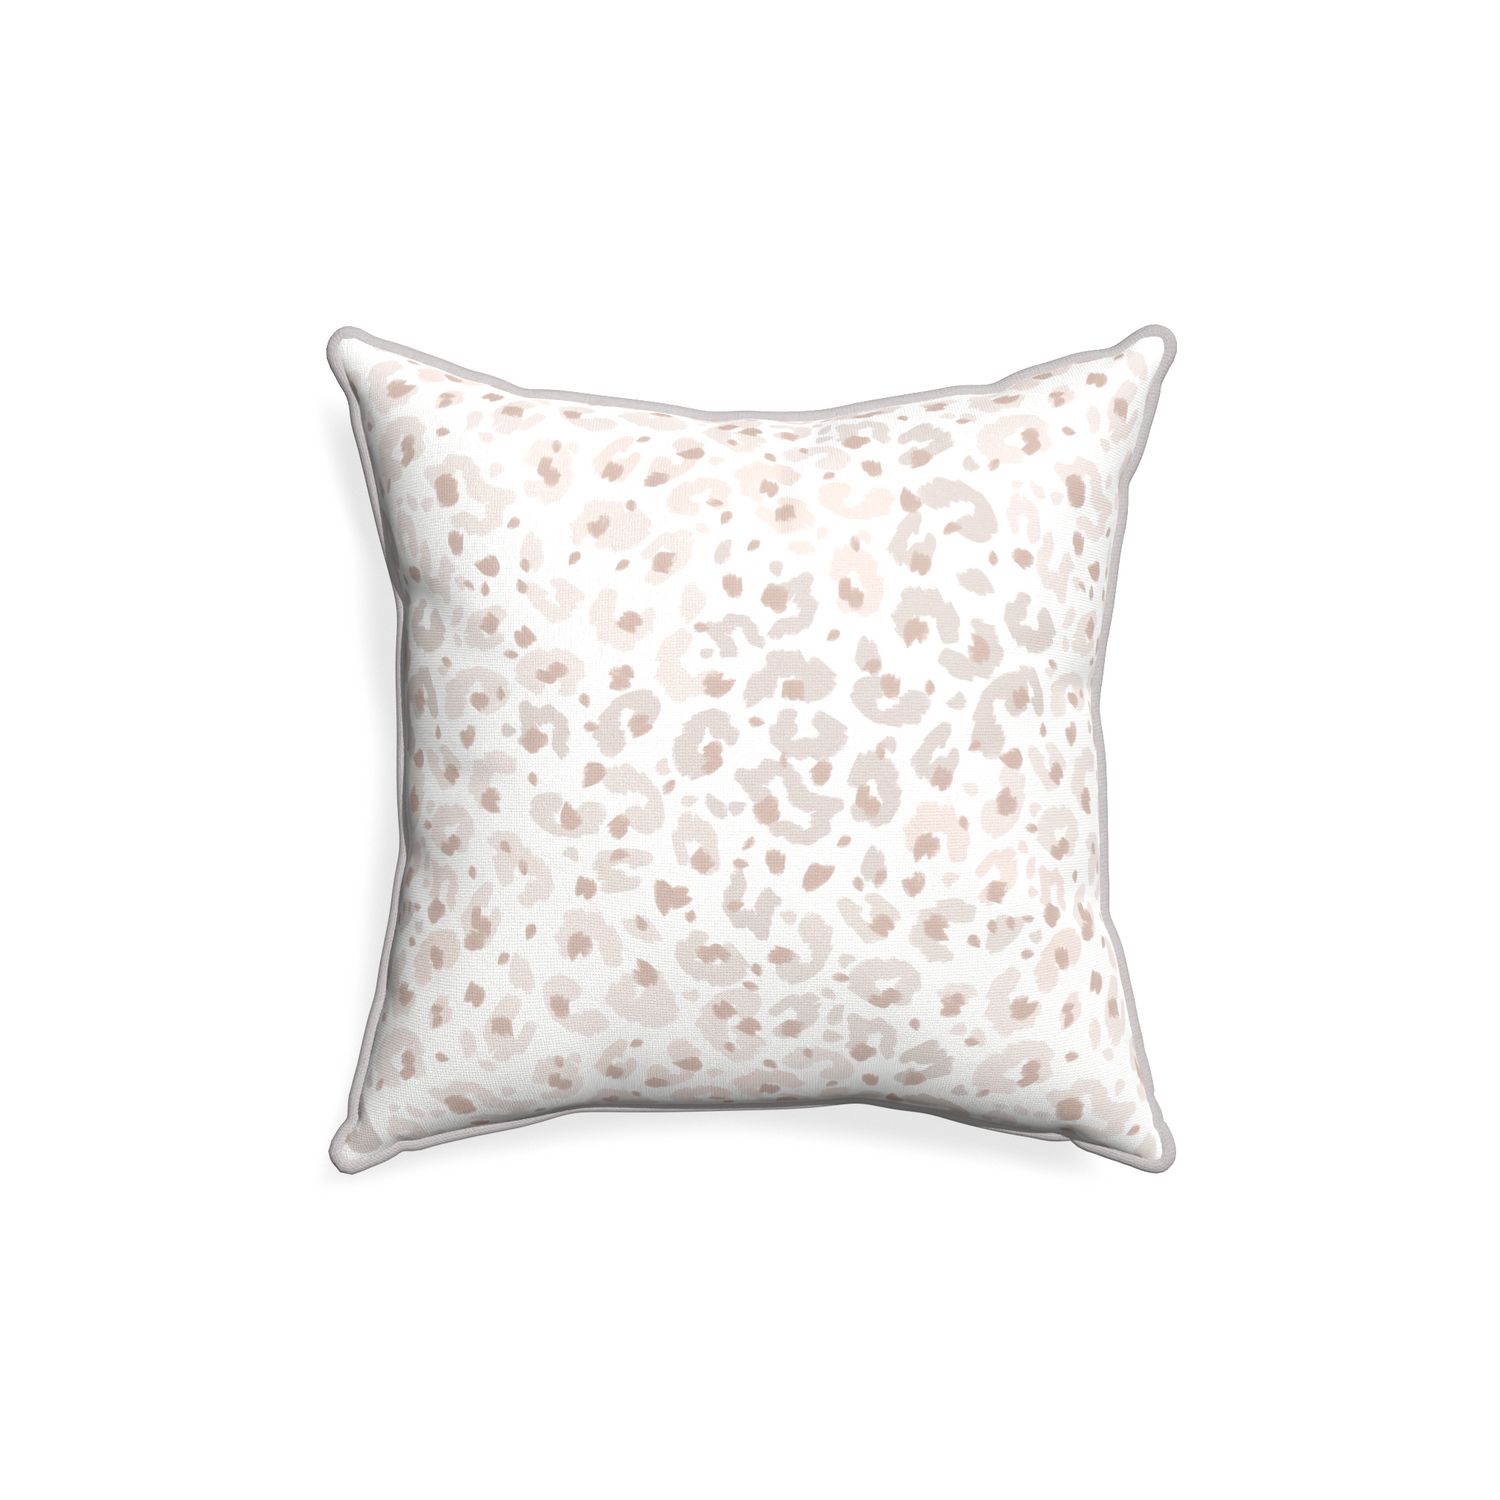 18-square rosie custom pillow with pebble piping on white background